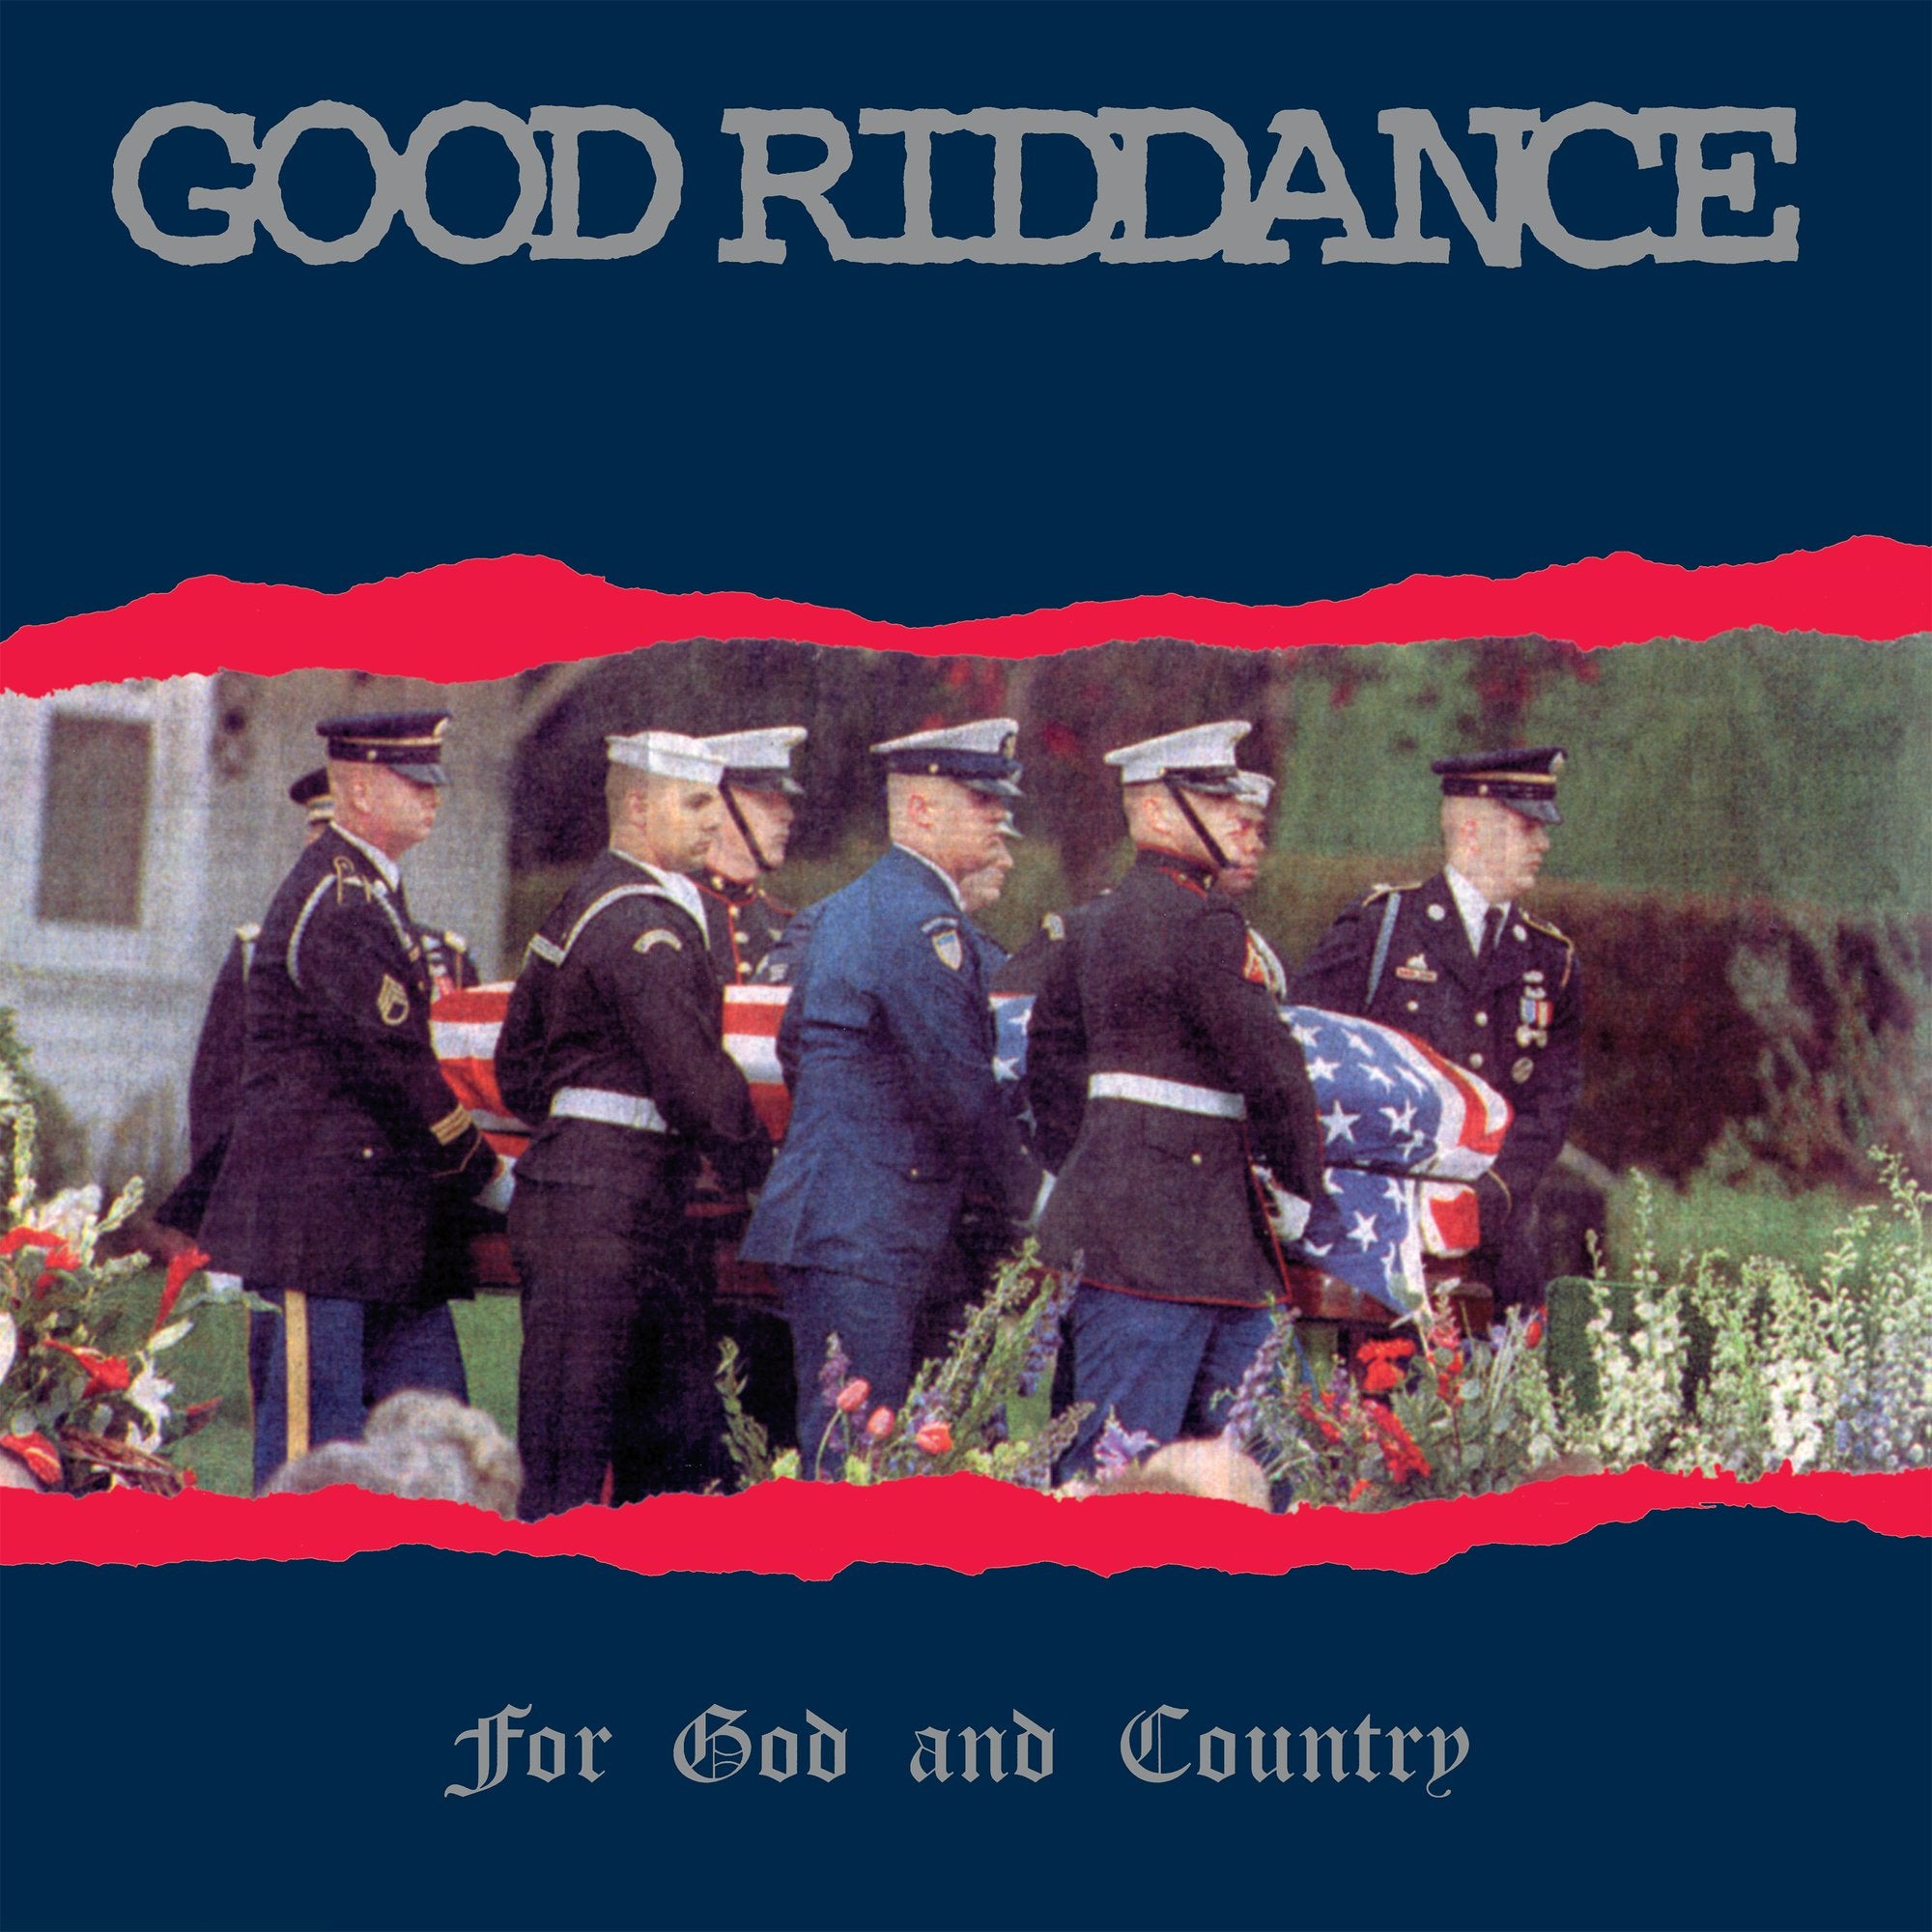 Good Riddance - For God and Country (Vinyl LP)